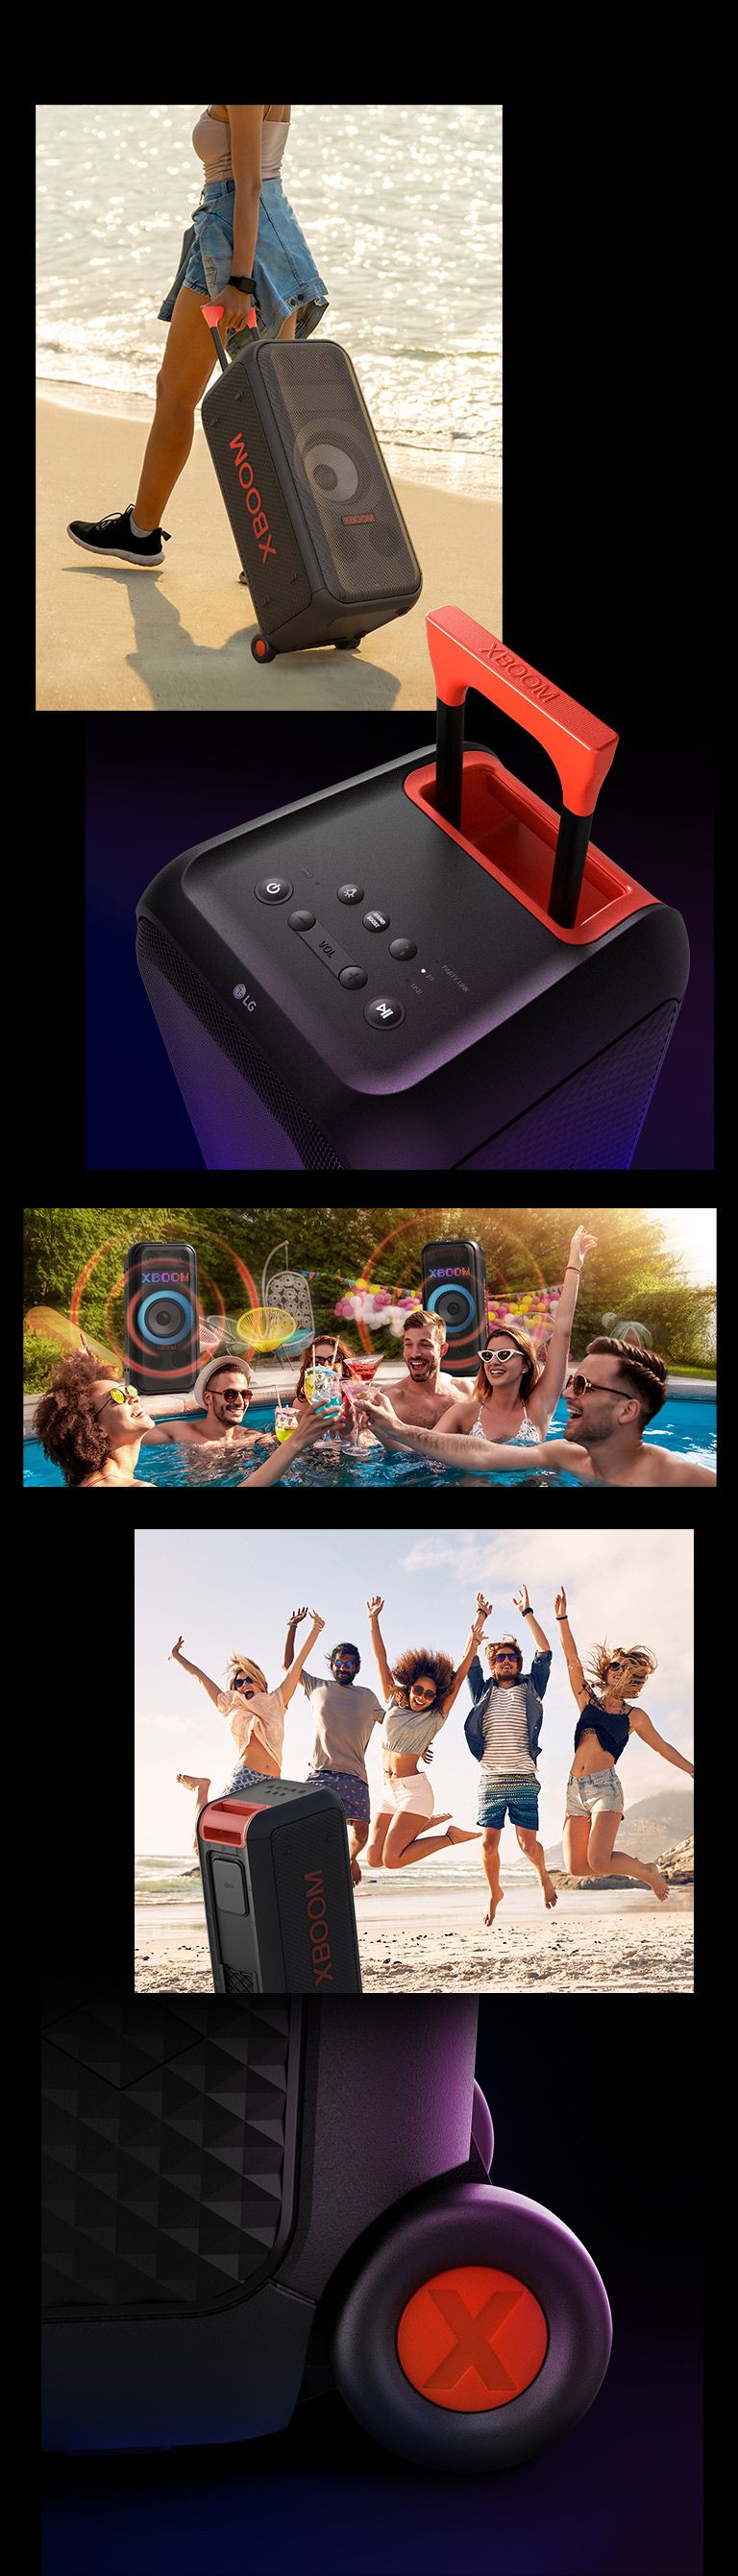 Illustrated images of LG XBOOM XL7S. From the top, shillouet of people, with the telescopic handle and wheels woman carrys the speaker easily. Top view of the speaker and telescopic handle. People are enjoying pool party, two LG XBOOM XL7S with sound graphics are placed behind. Back view of the speaker and people are juming on the beach, close-up of the wheel.